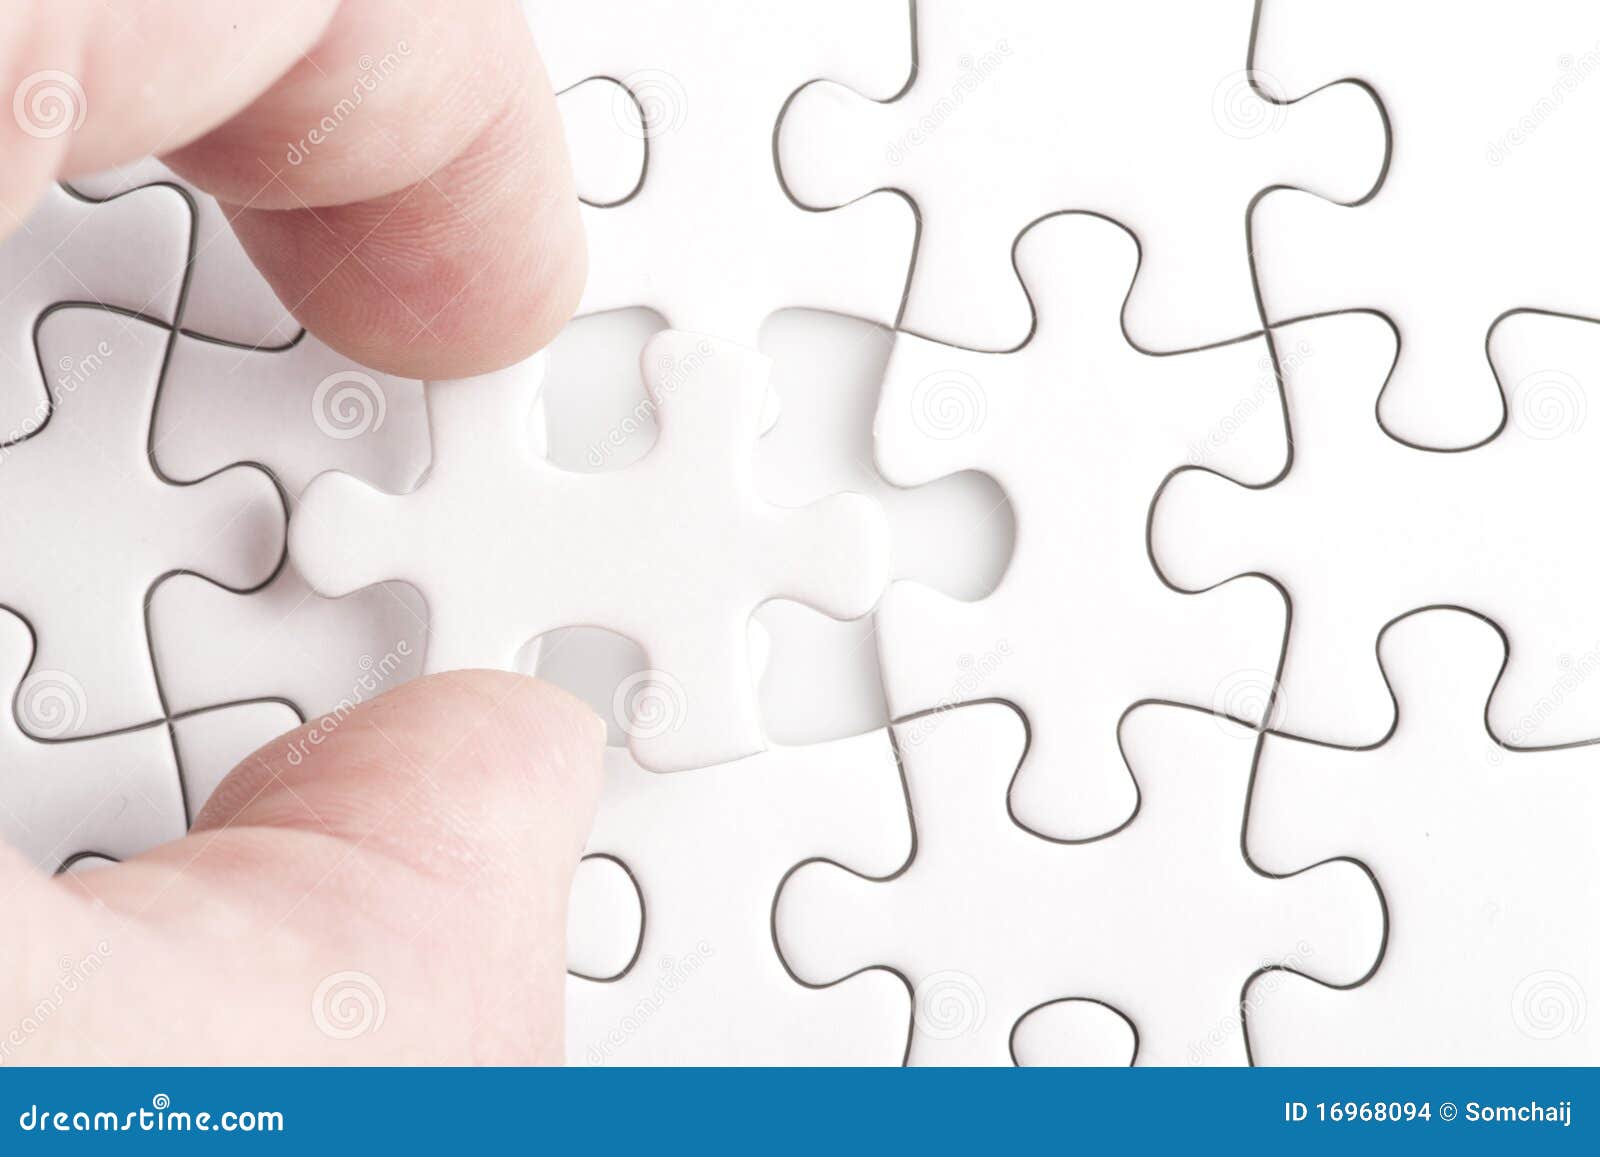 Complete Missing Jigsaw Puzzle Stock Images - Image: 16968094